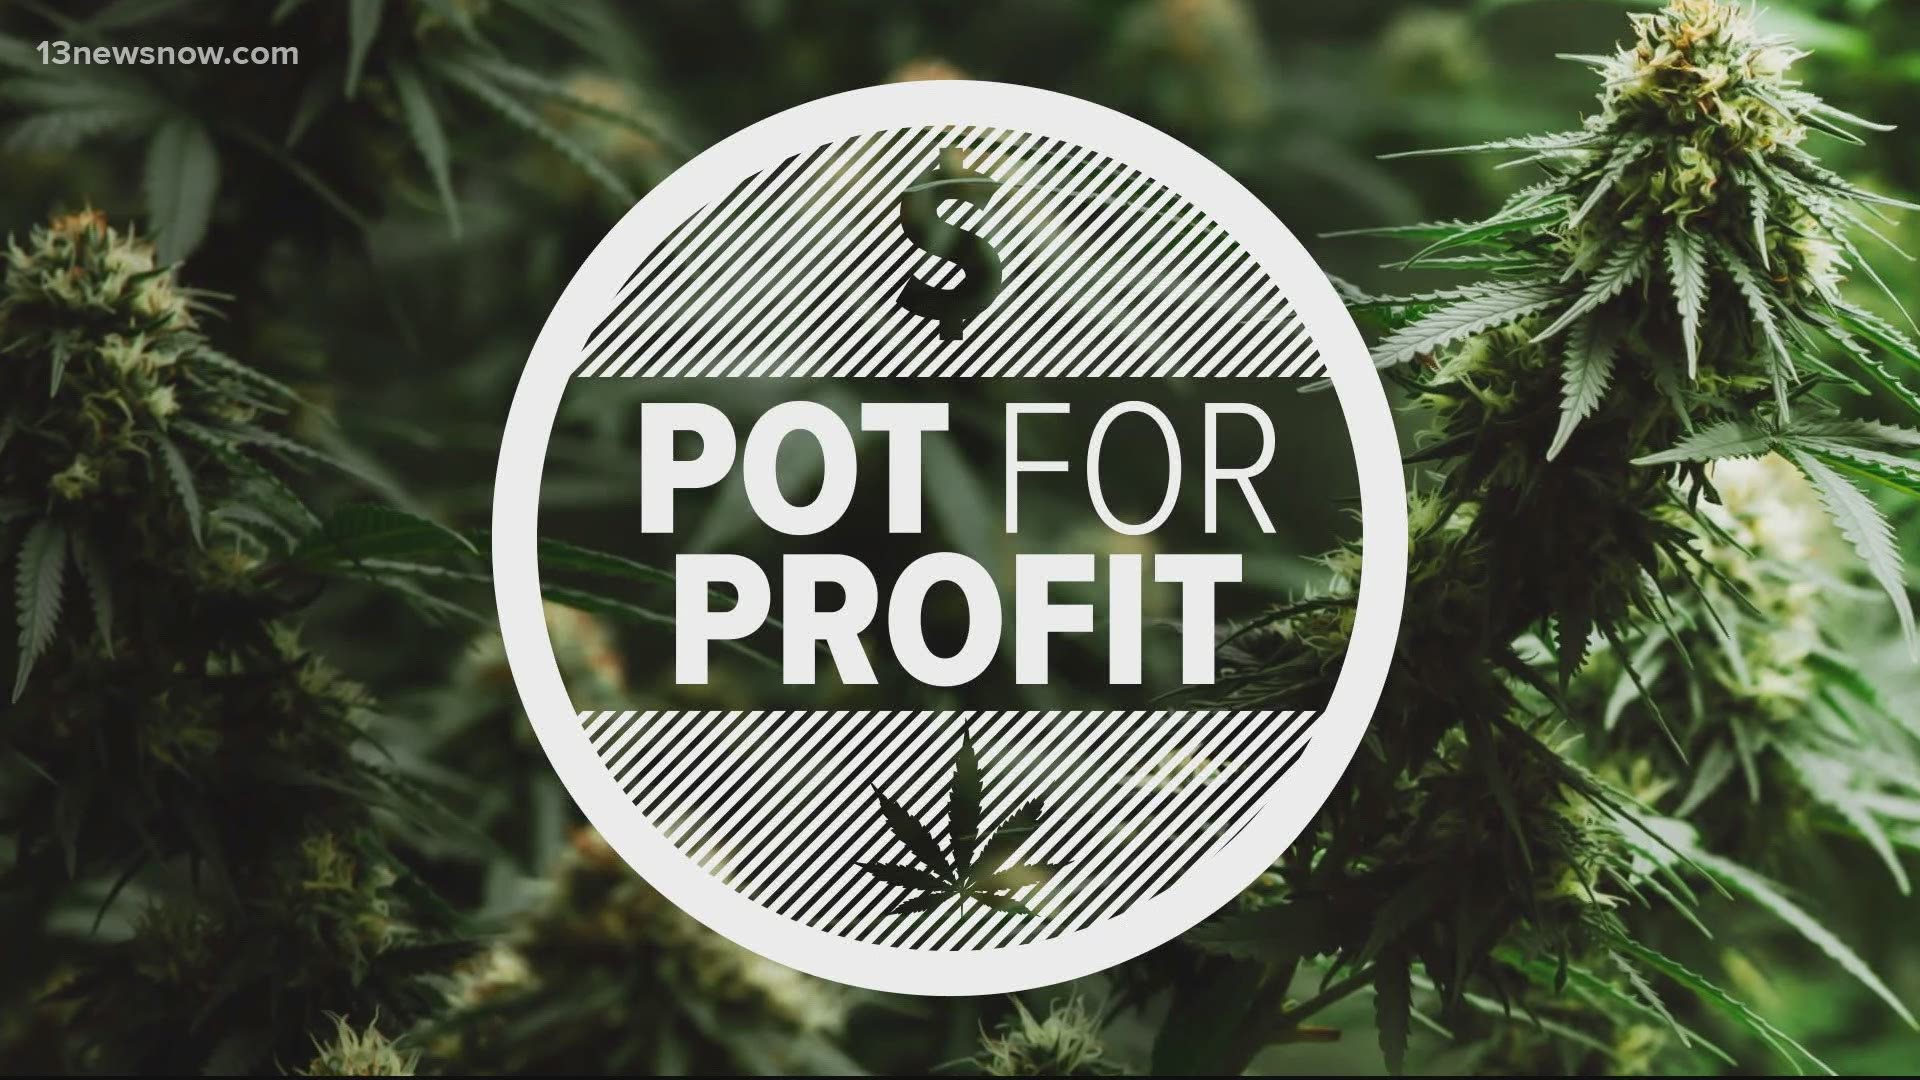 Pot For Profit: A 13News Now special report on Virginia's changing laws, views, and attitudes on legal marijuana.